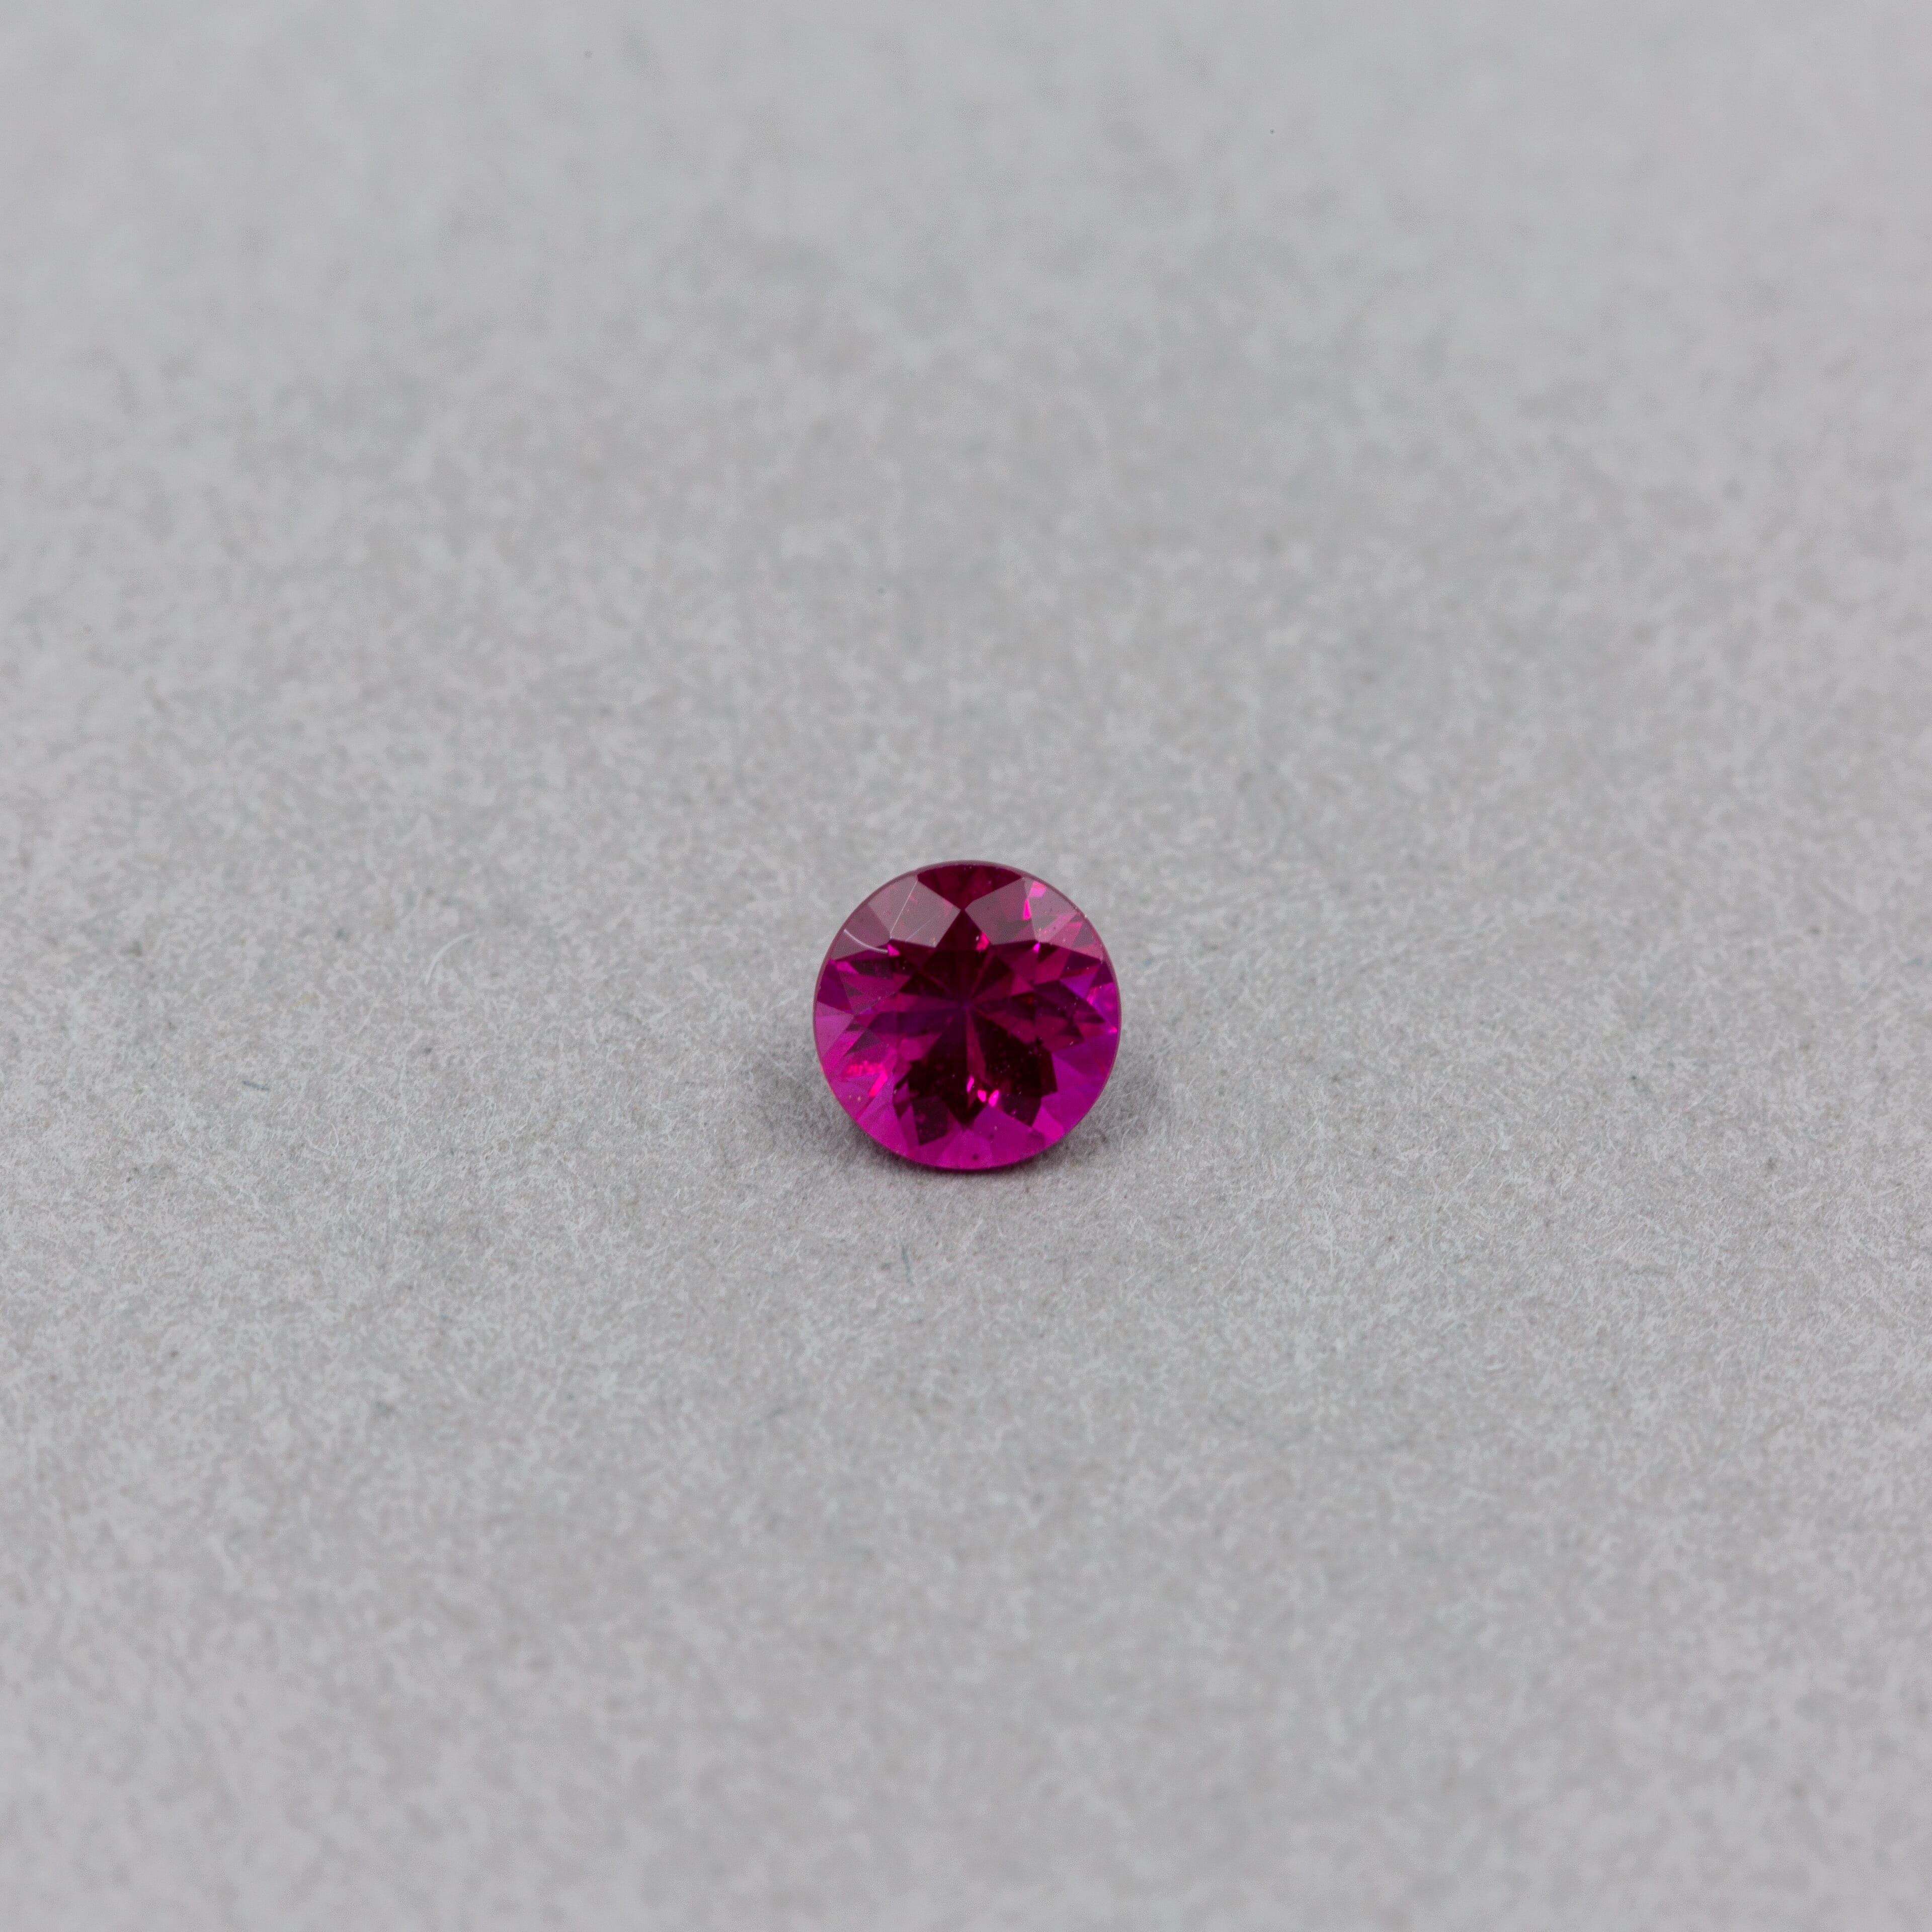 GXG149h - 0.36ct